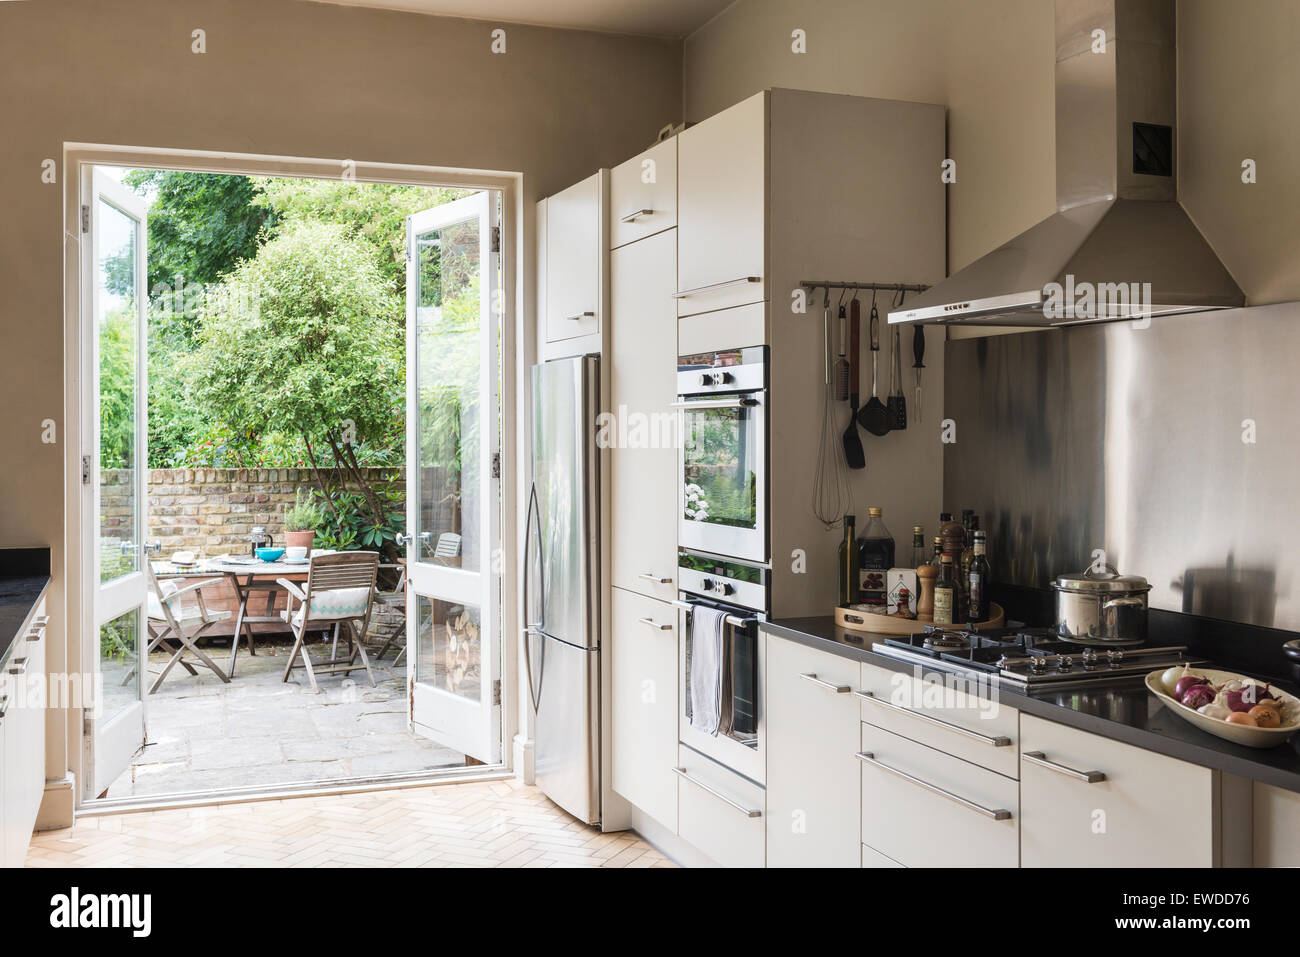 French windows open onto garden from kitchen area with ...